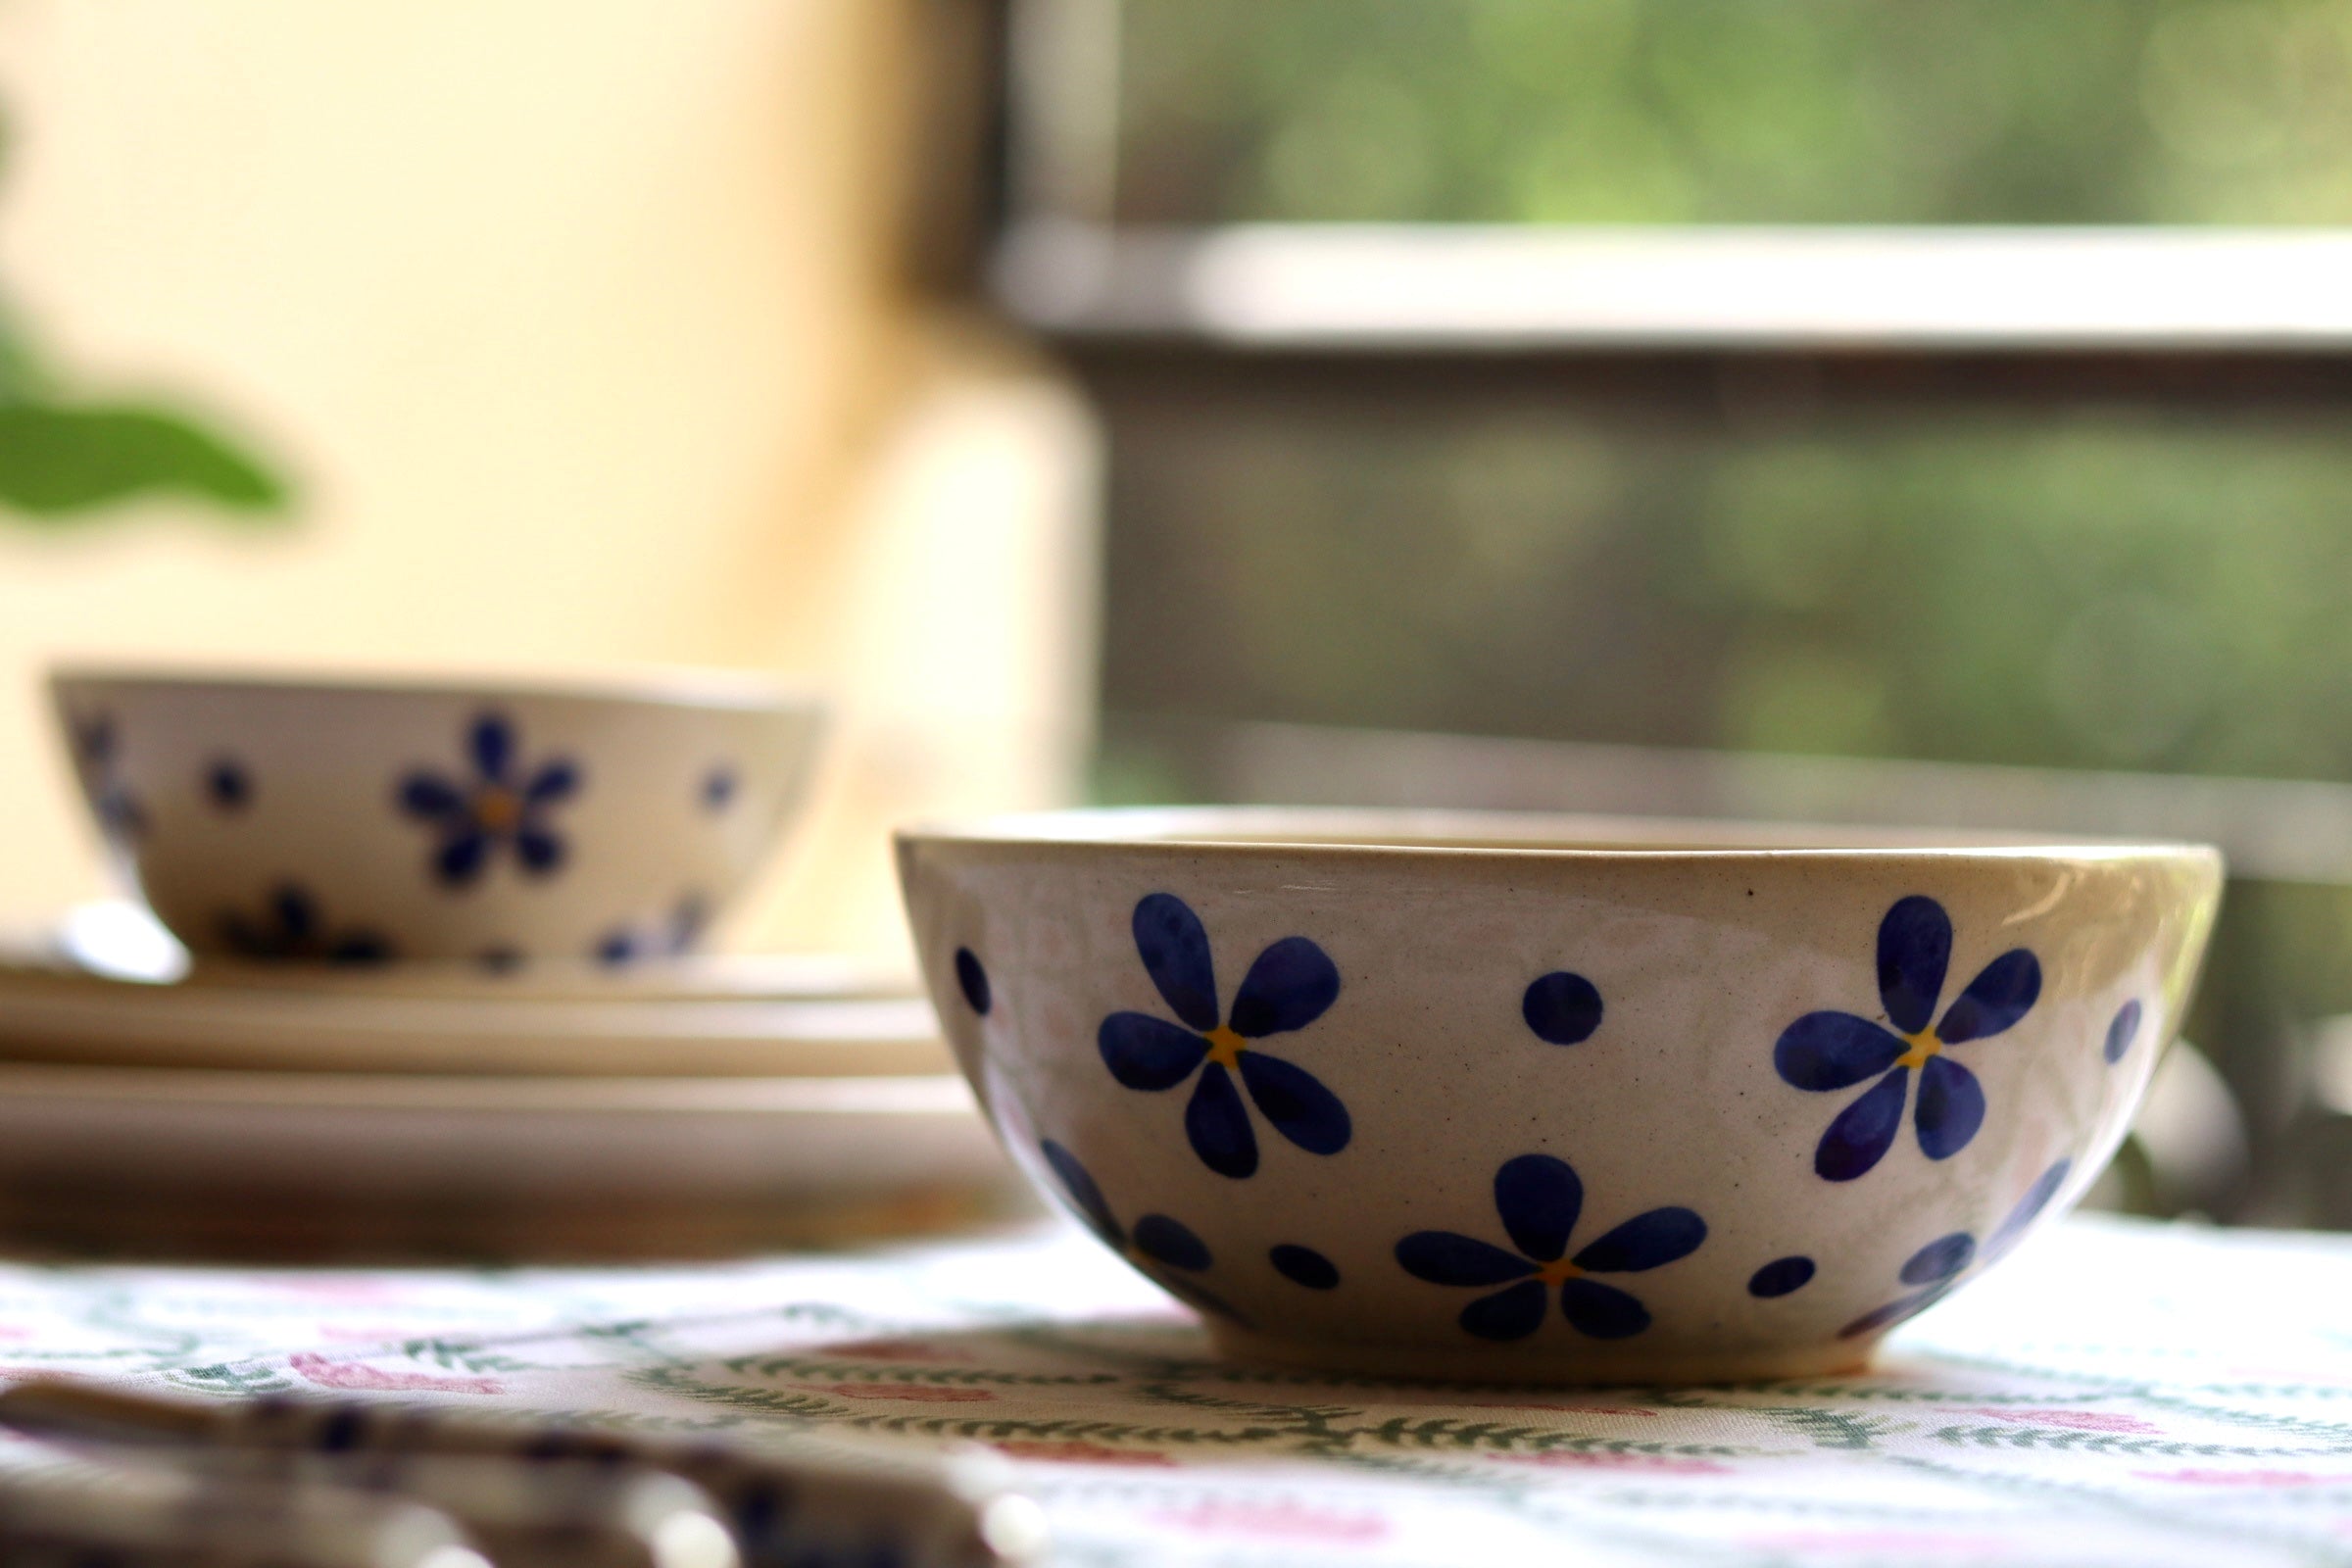 Two curry bowls with floral design